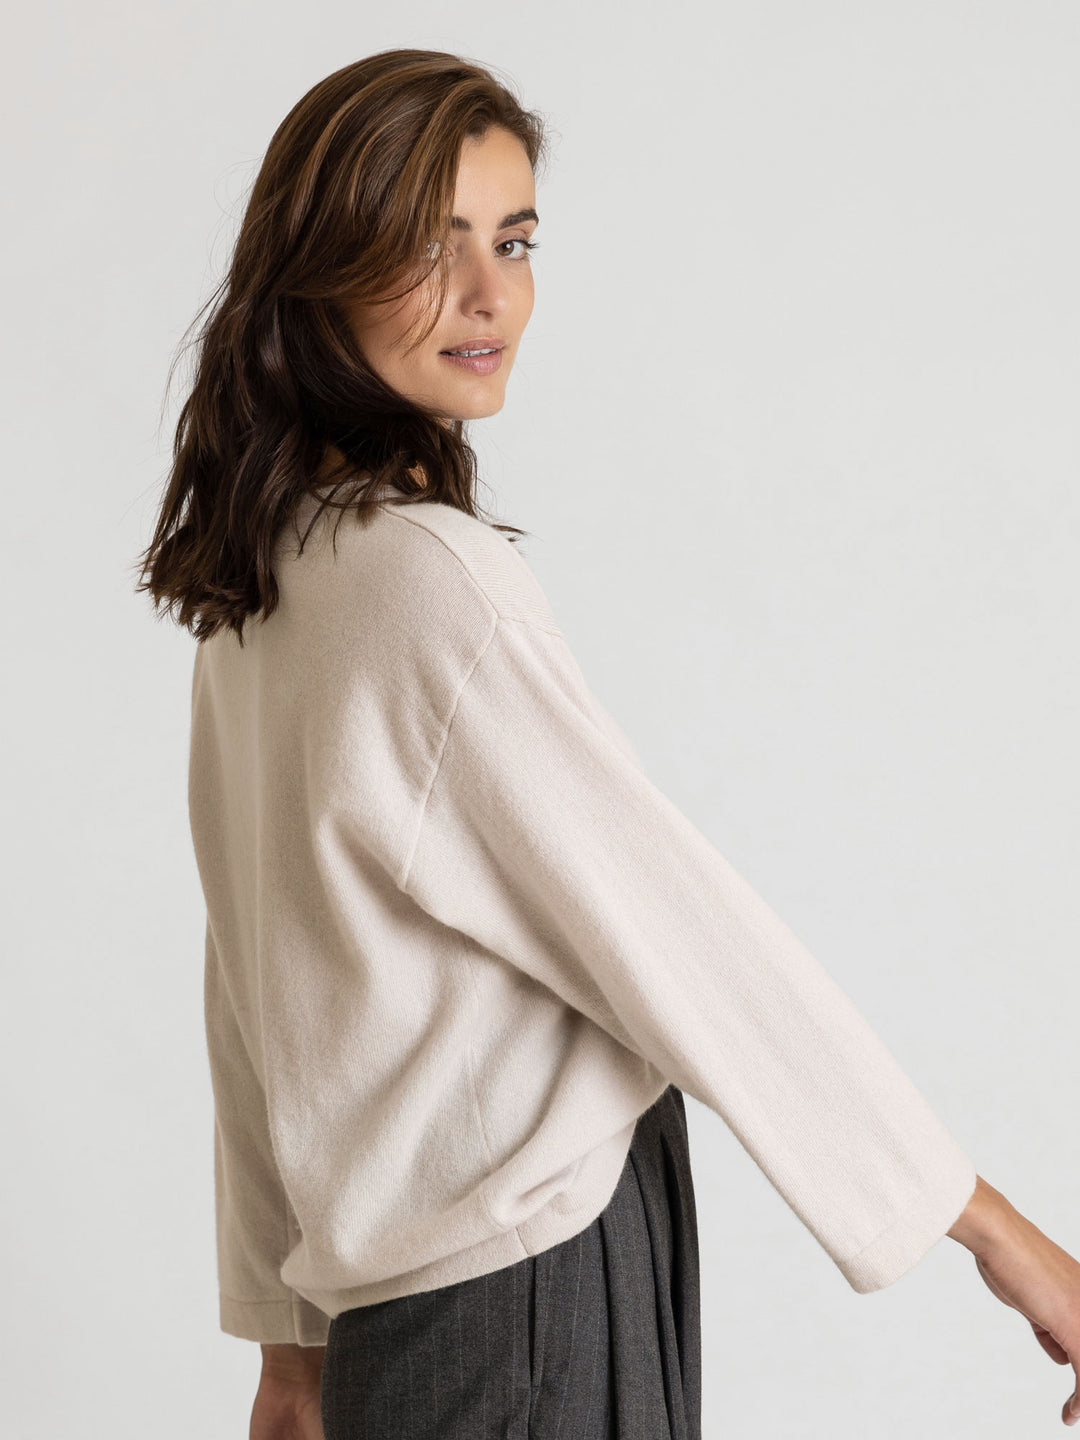 long sleeved cashmere sweater Flash in 100% cashmere by Kashmina. Color pearl